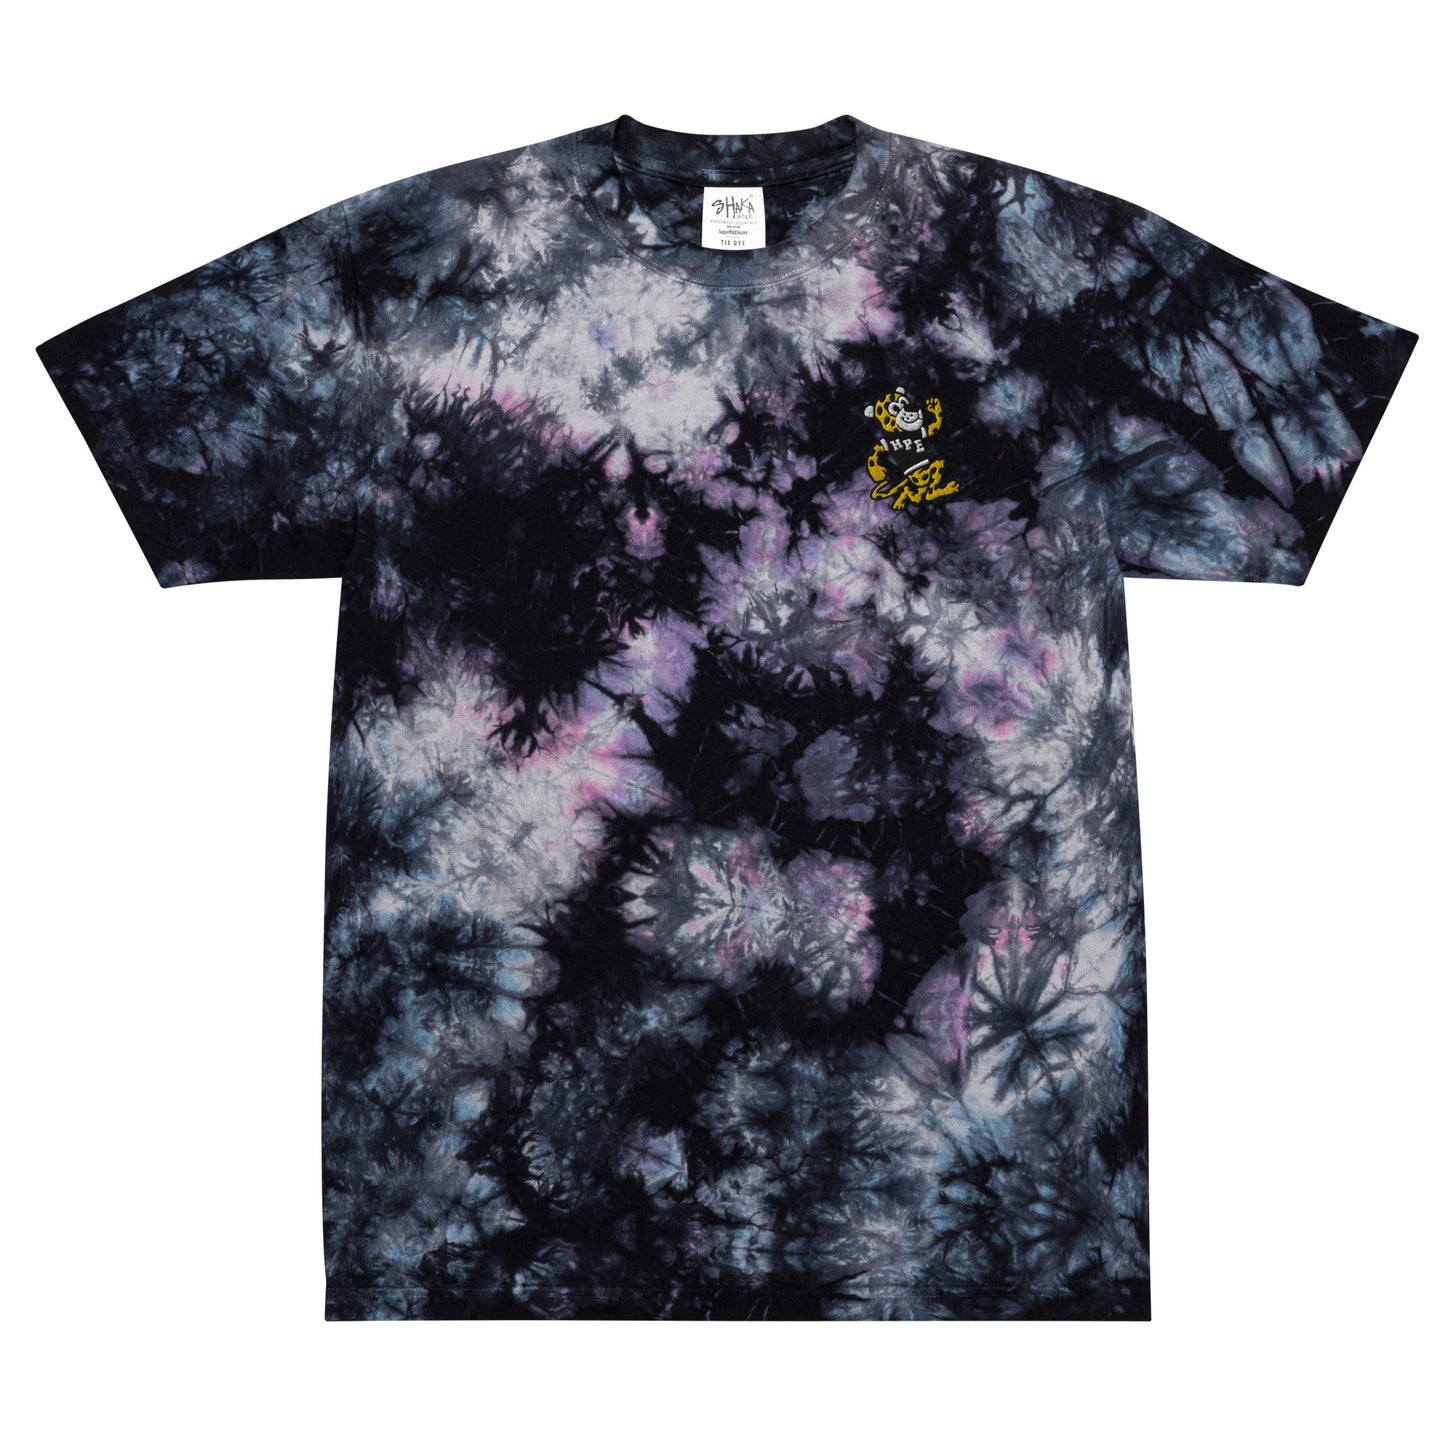 Adult Embroidered Tie-Dye T-shirt